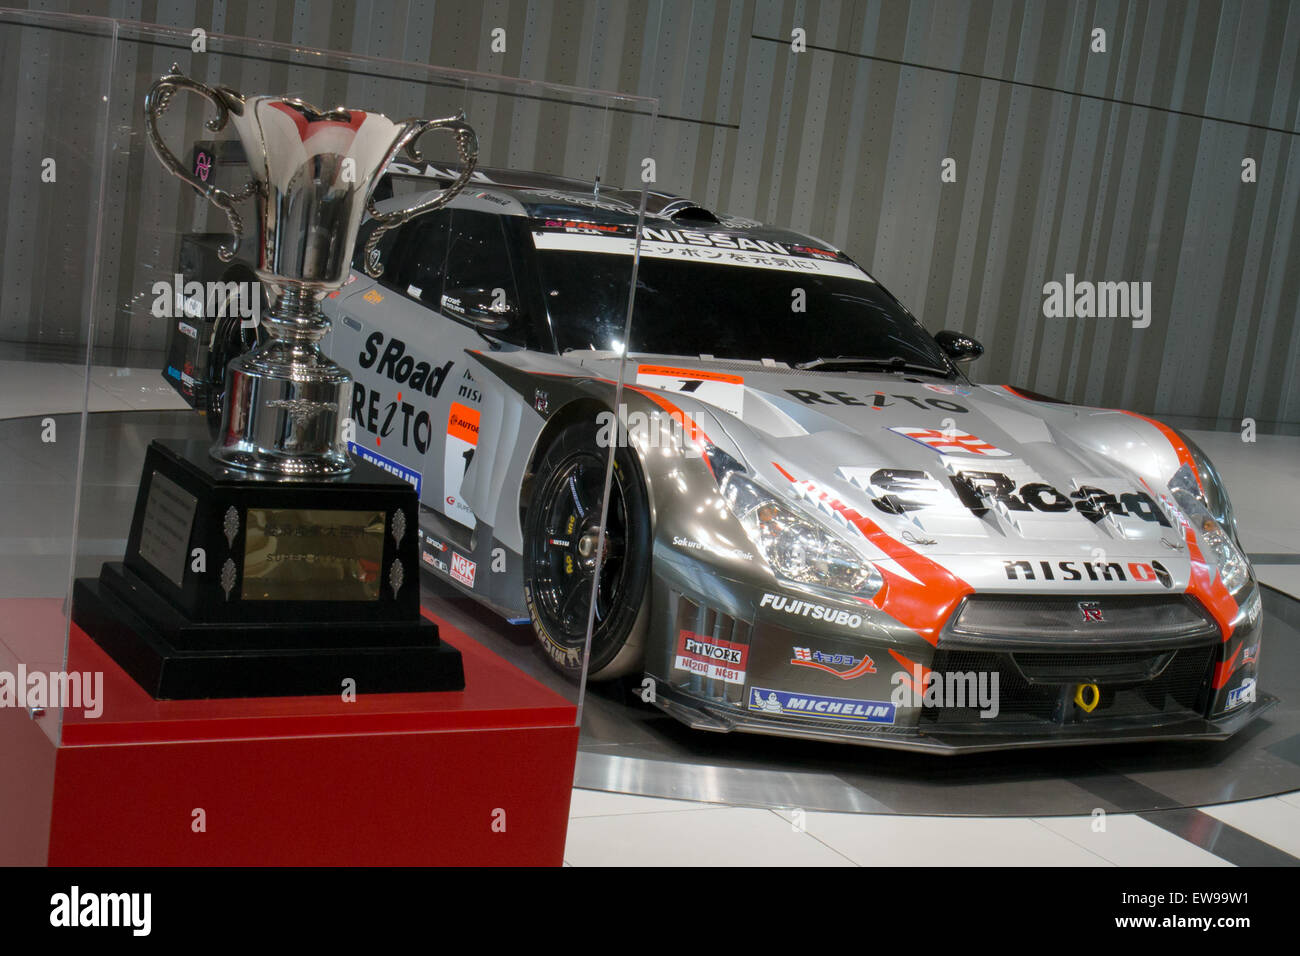 S Road Mola 2013 Nissan GT-R Global Headquarters Gallery Stockfoto